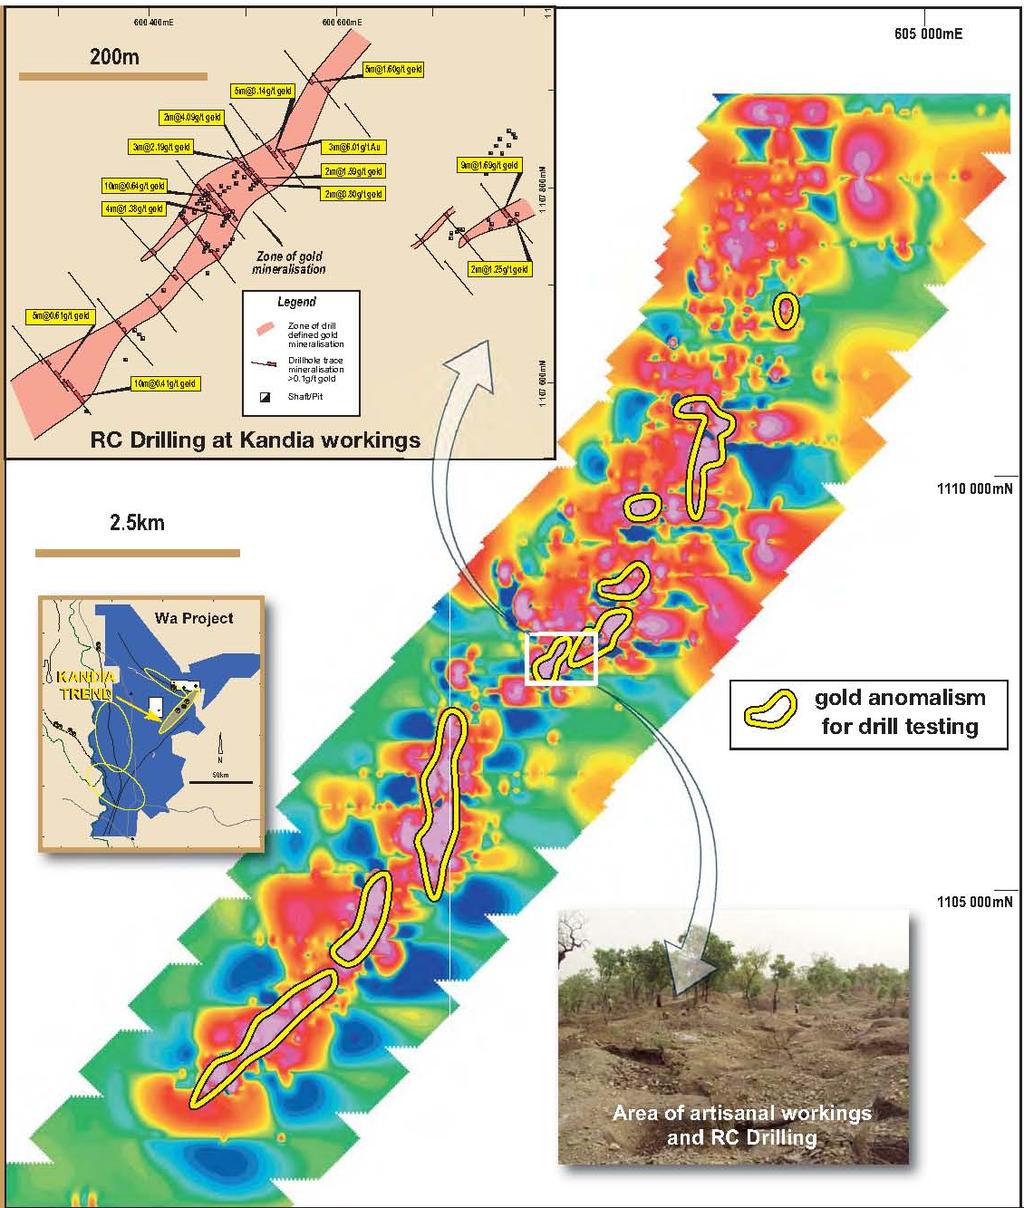 Kandia Prospect Infill soil geochemical sampling testing the strike extensions to the Kandia artisanal gold workings has outlined nine strong gold targets over a +12km long zone along the Kandia